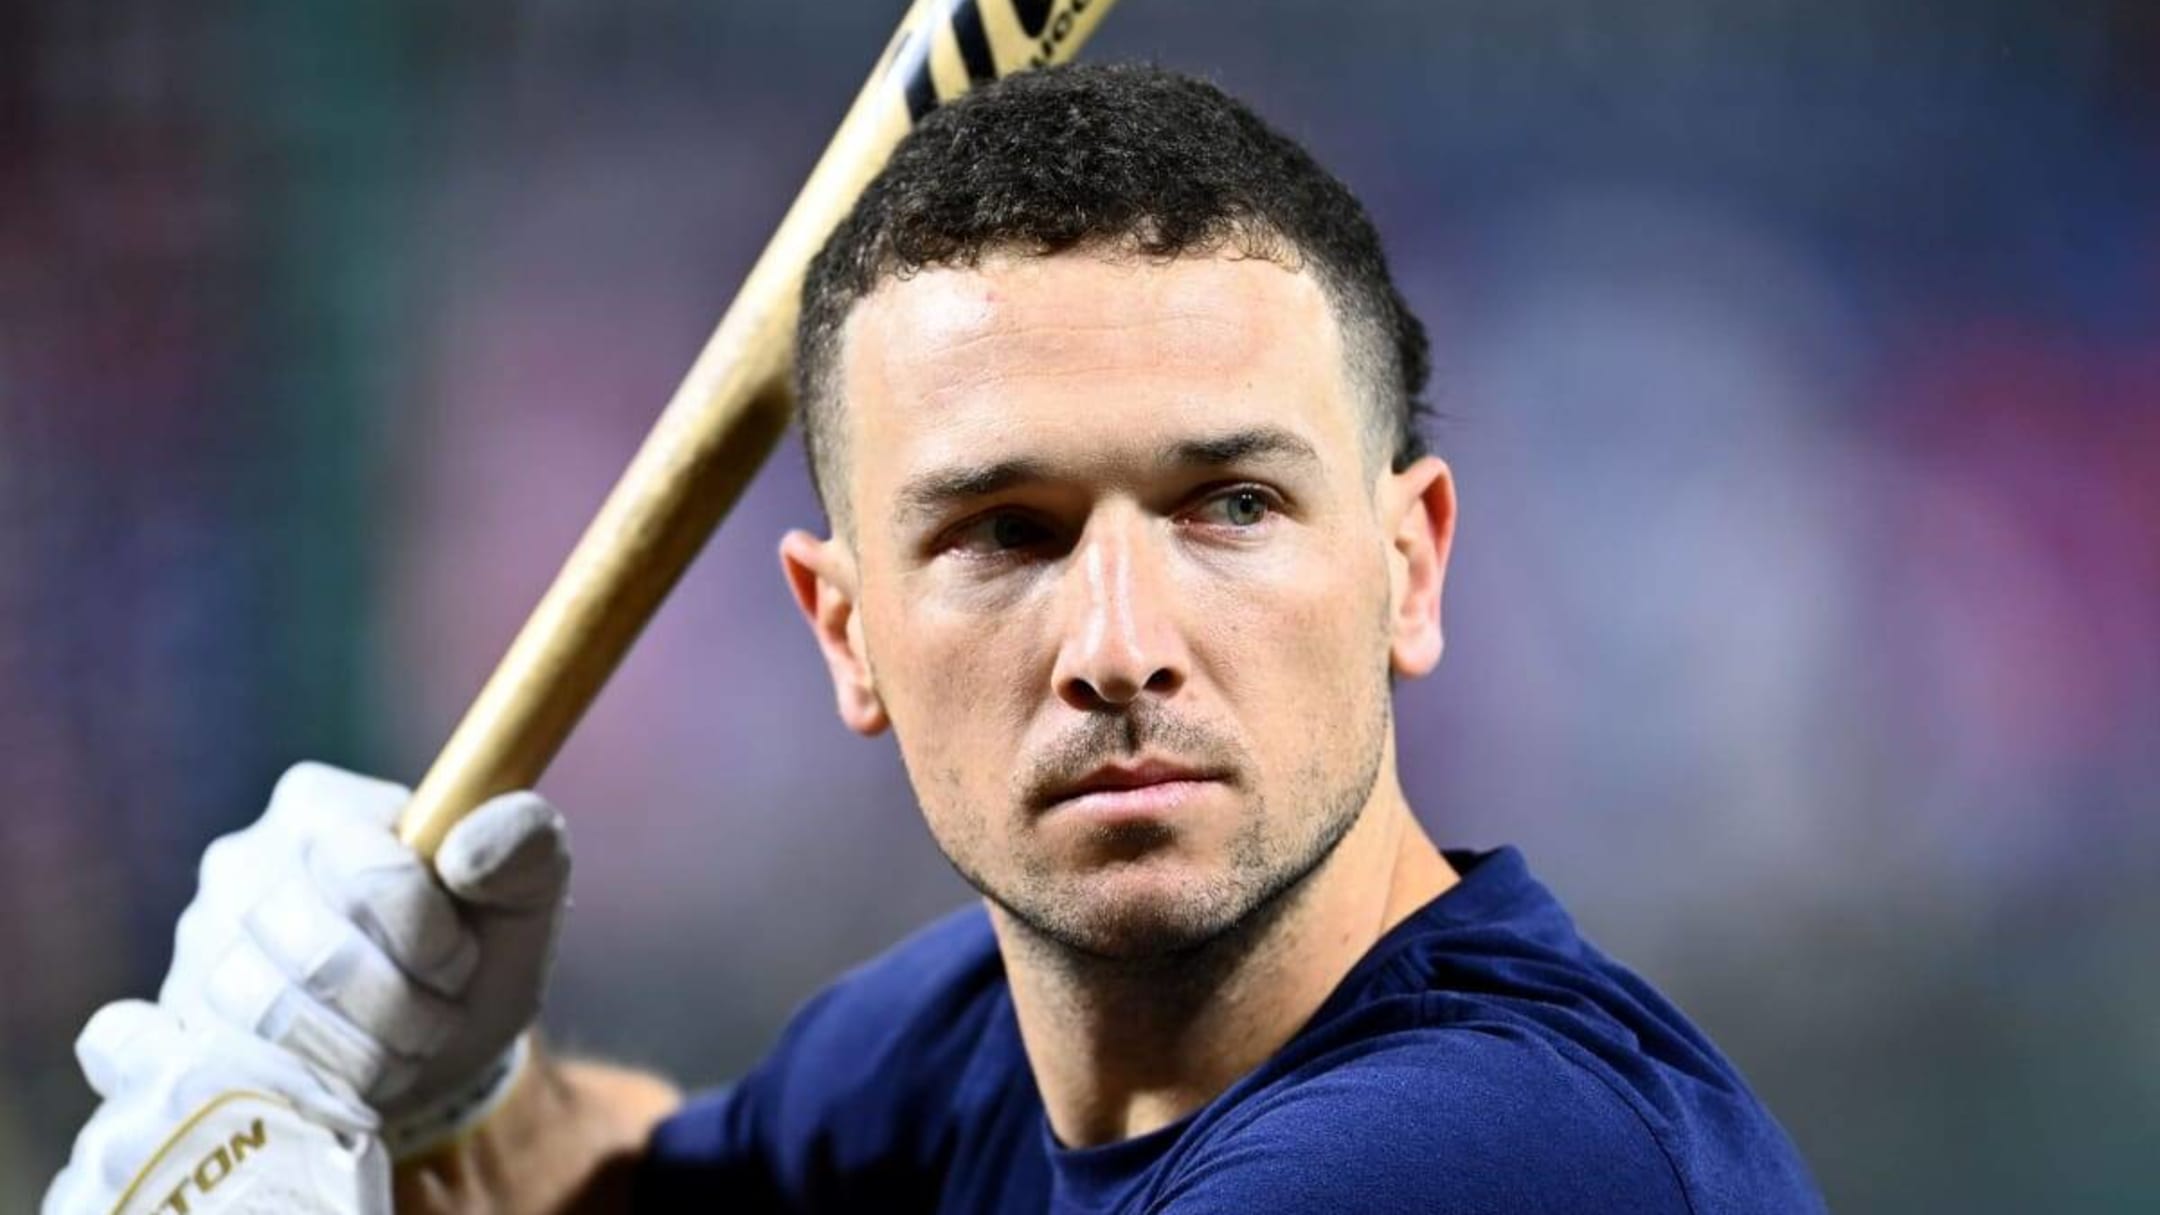 Alex Bregman Posts Christmas Picture with Wife and Baby on Instagram